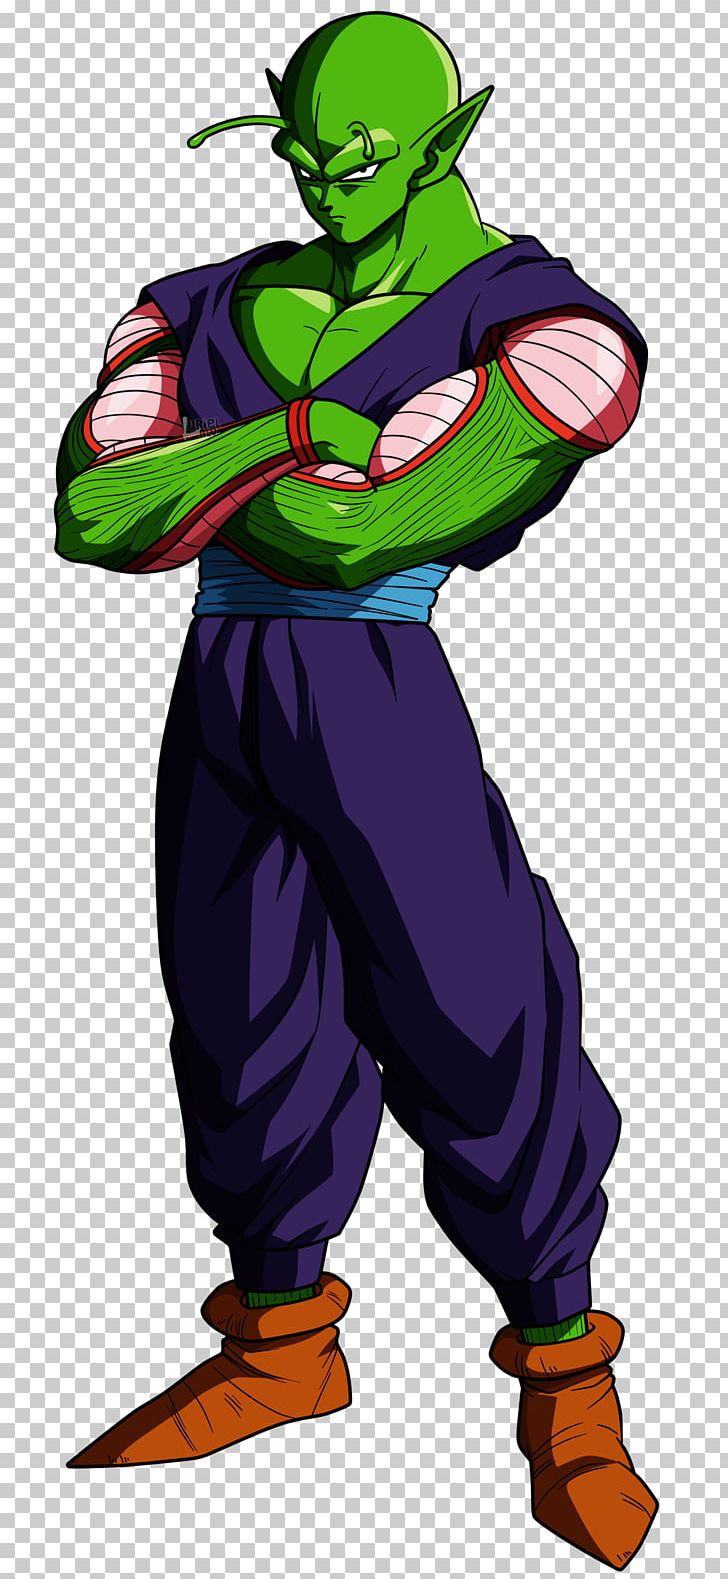 Piccolo Dragon Ball FighterZ Gohan Goku Frieza PNG, Clipart, Android 18, Art, Cartoon, Character, Costume Free PNG Download